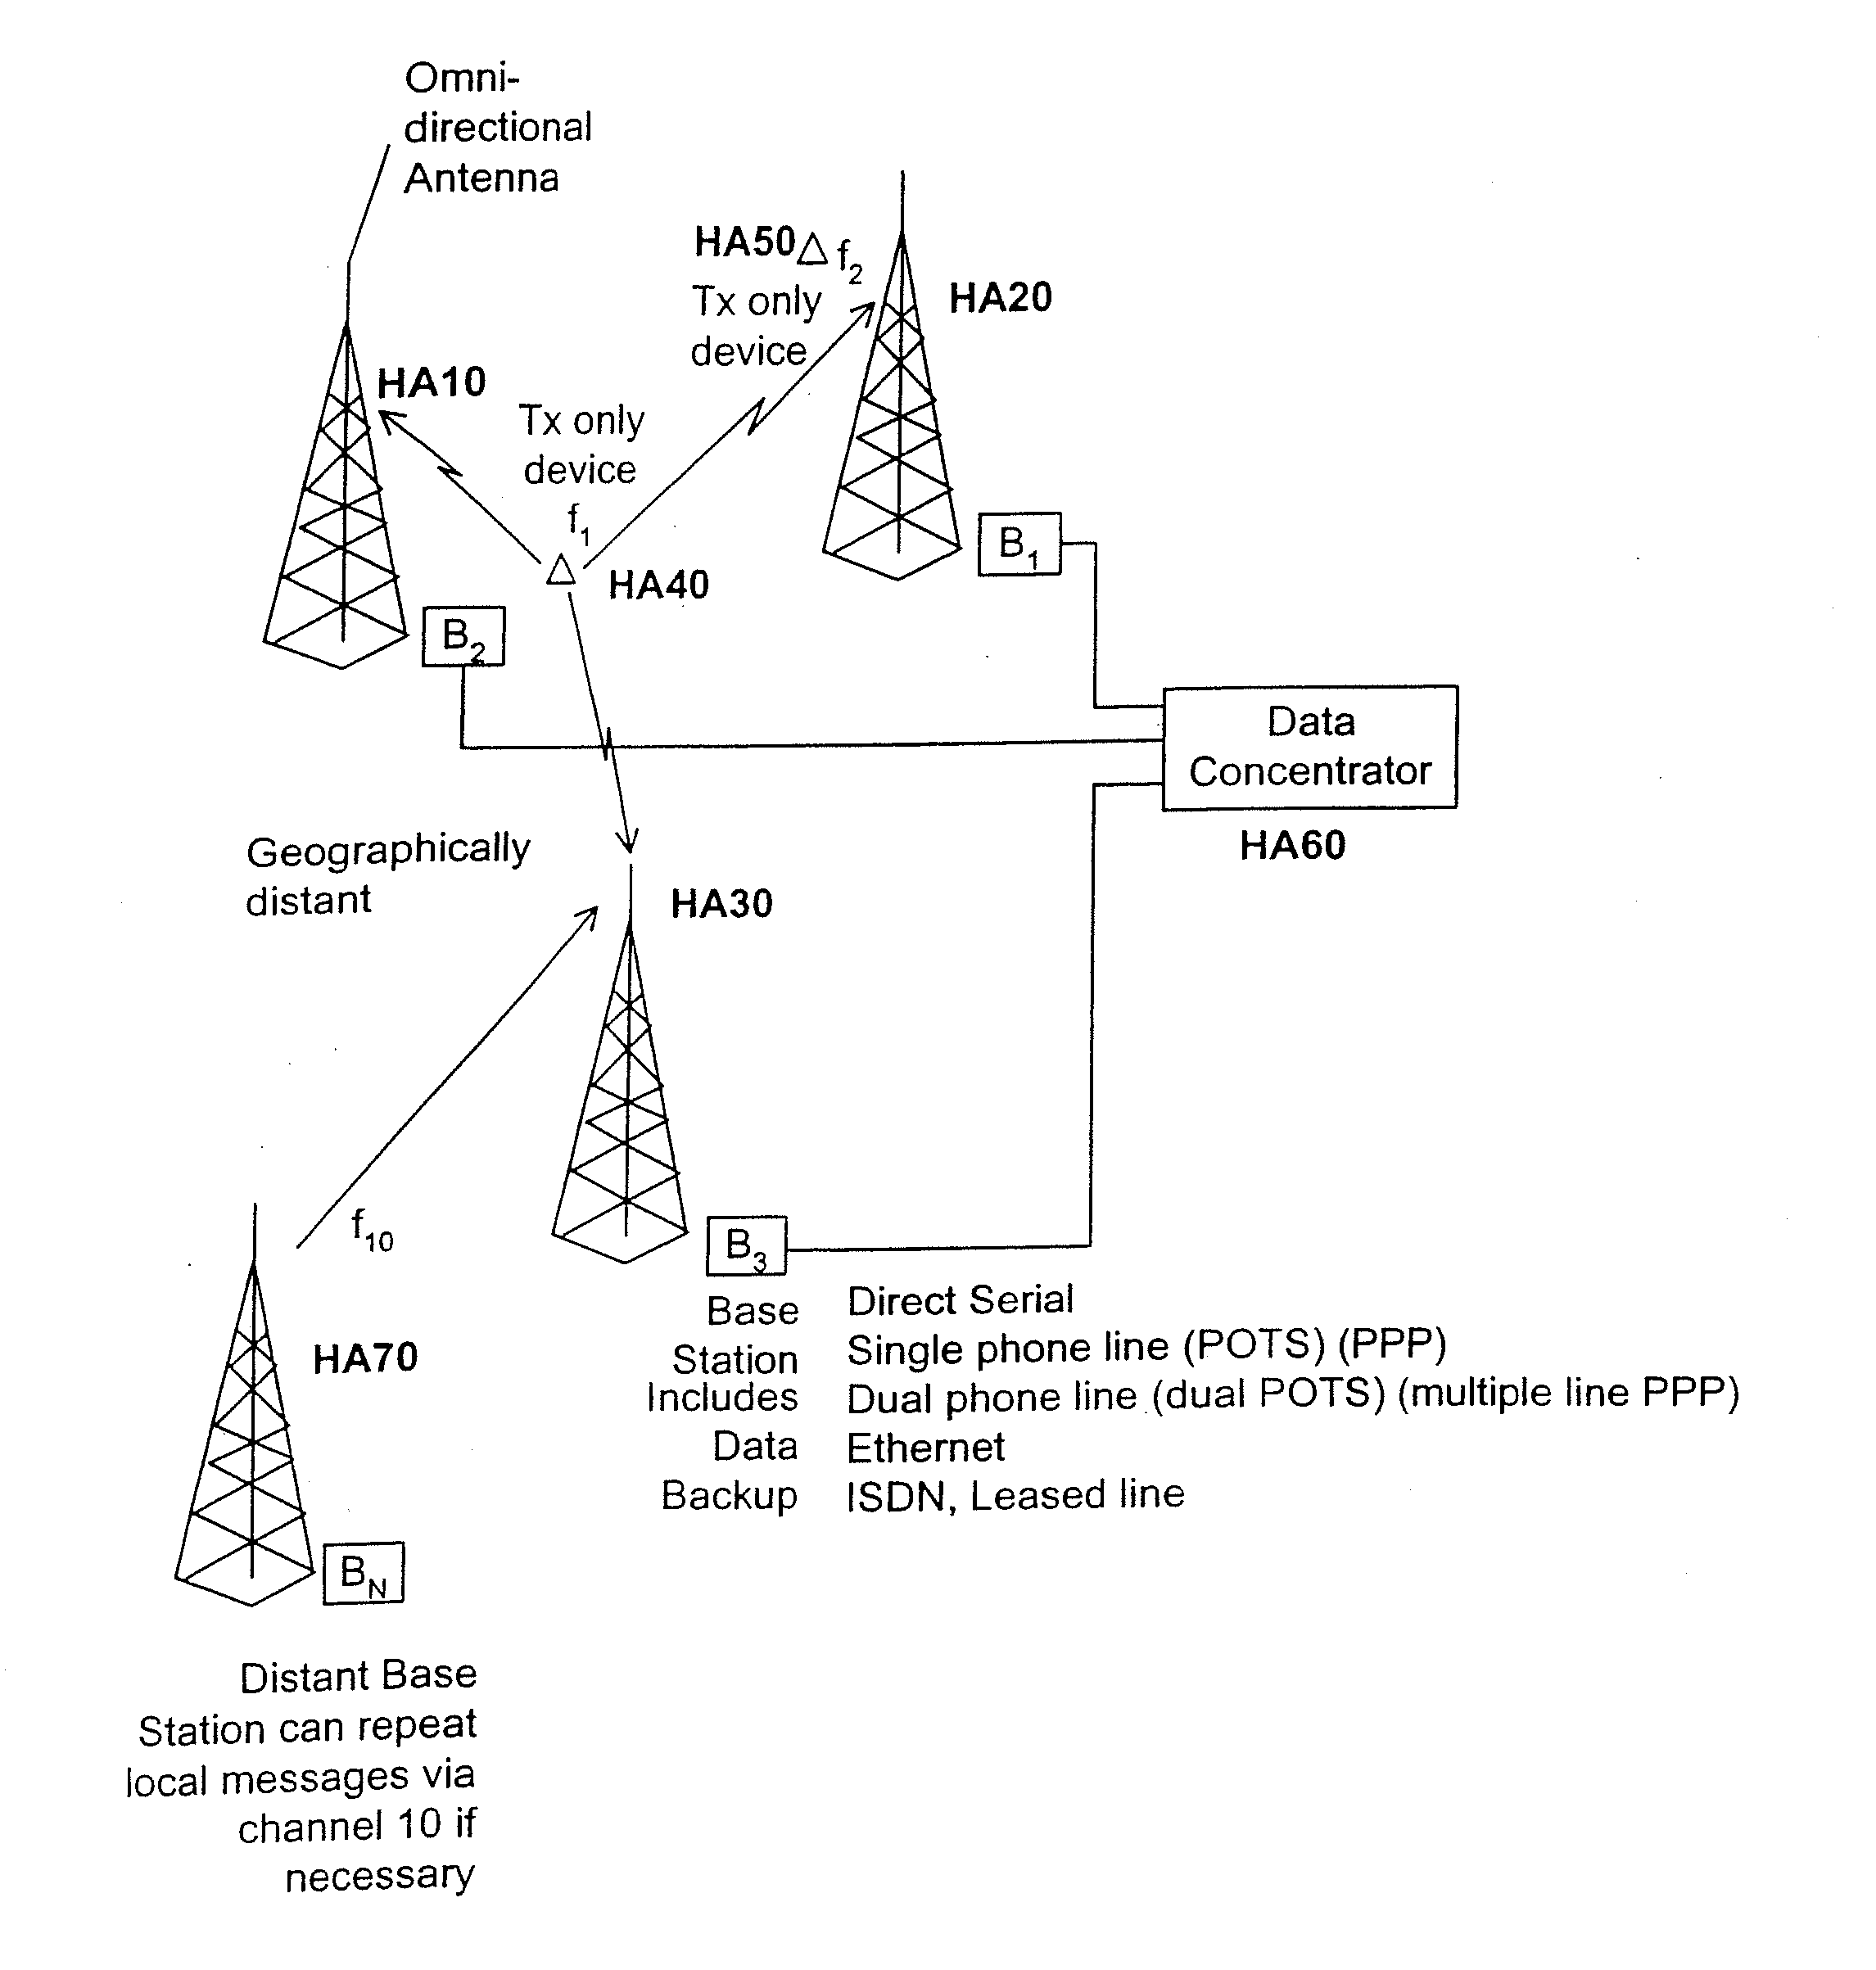 Enhanced wireless packet data communication system, method, and apparatus applicable to both wide area networks and local area networks